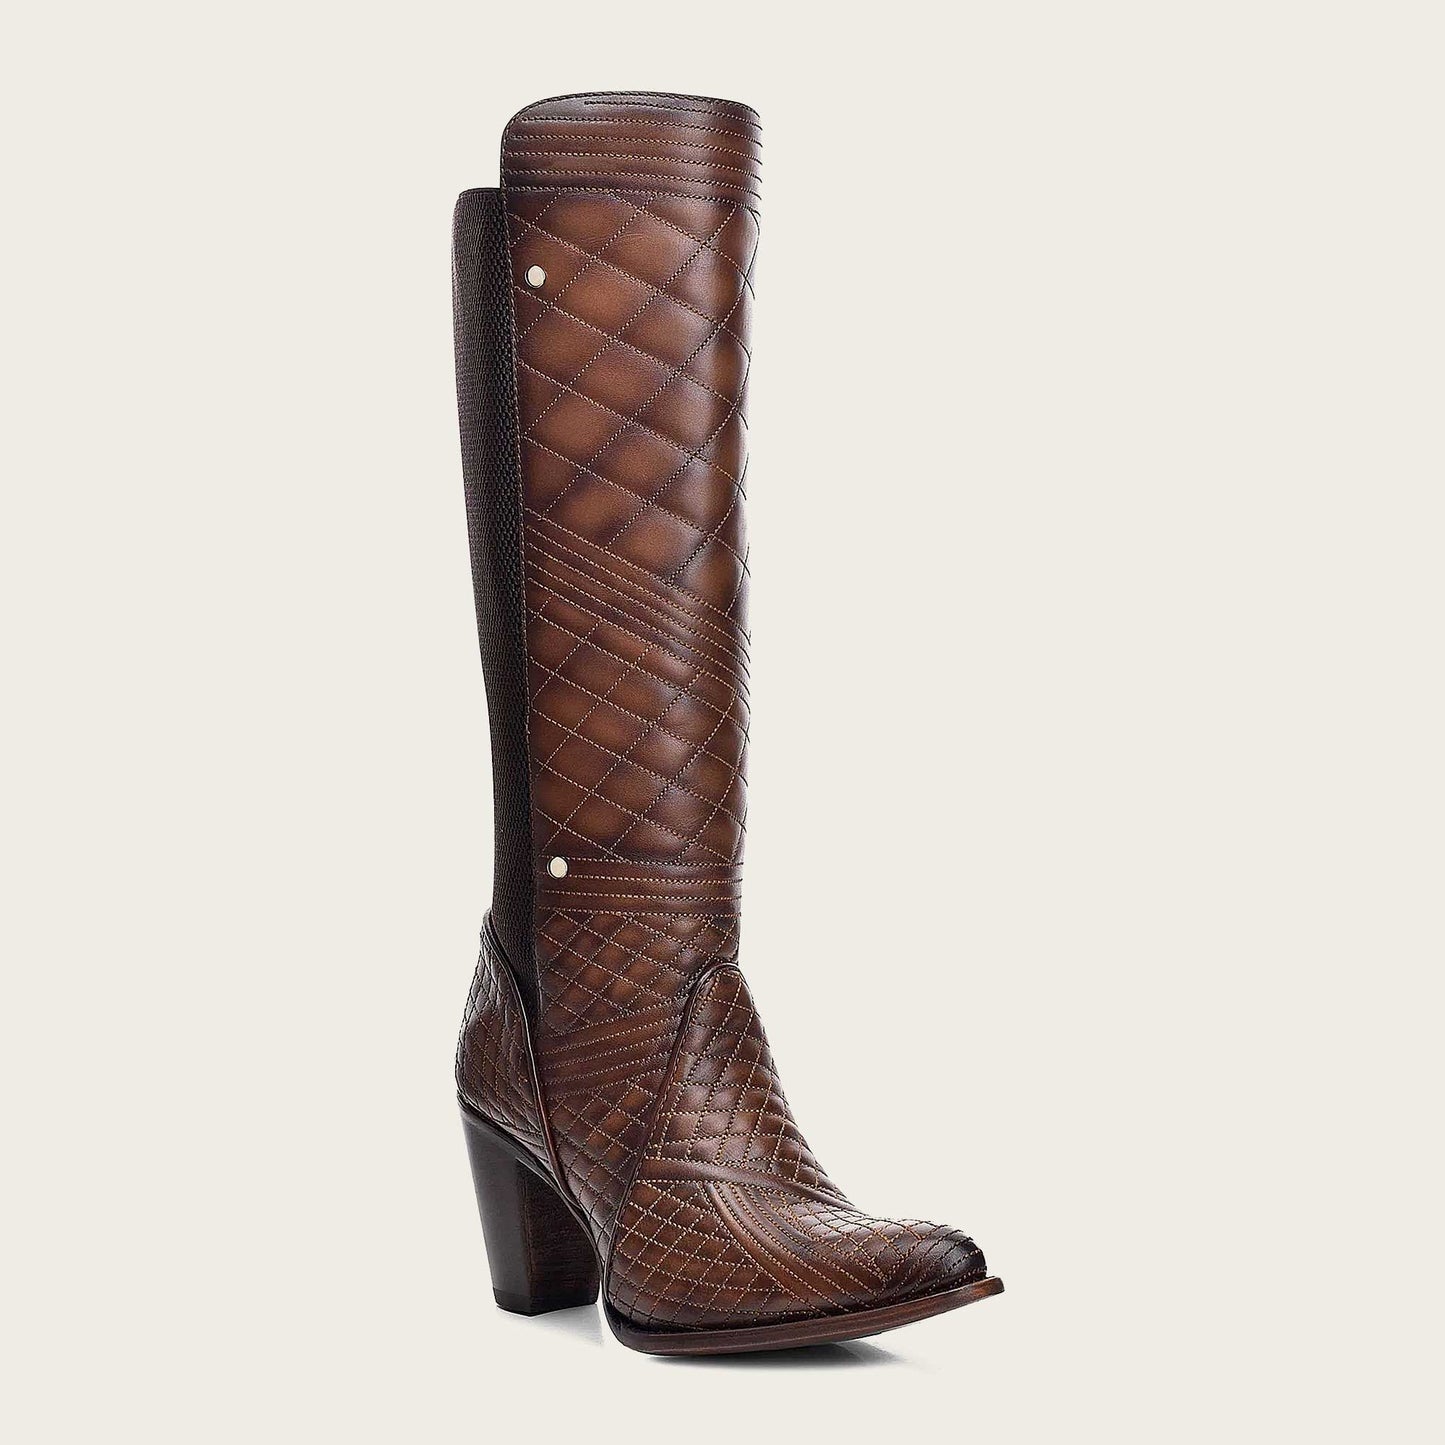 Experience the artistry of exquisite embroidery with these brown leather boots that exude sophistication and charm.